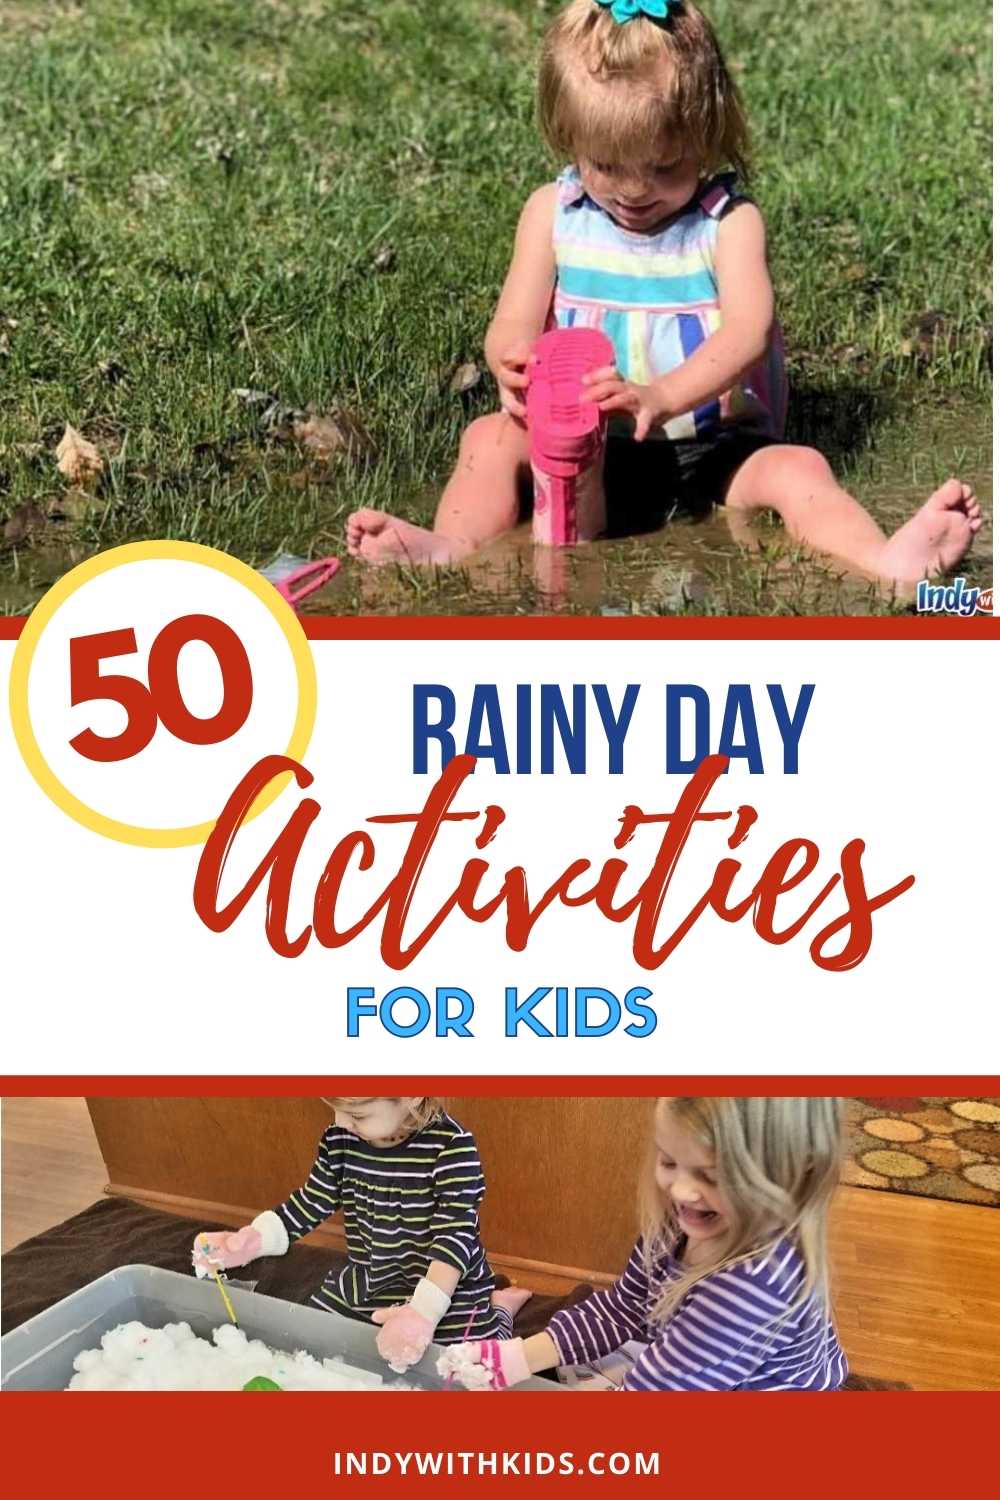 50 Super Fun Rainy Day Activities For Kids of All Ages